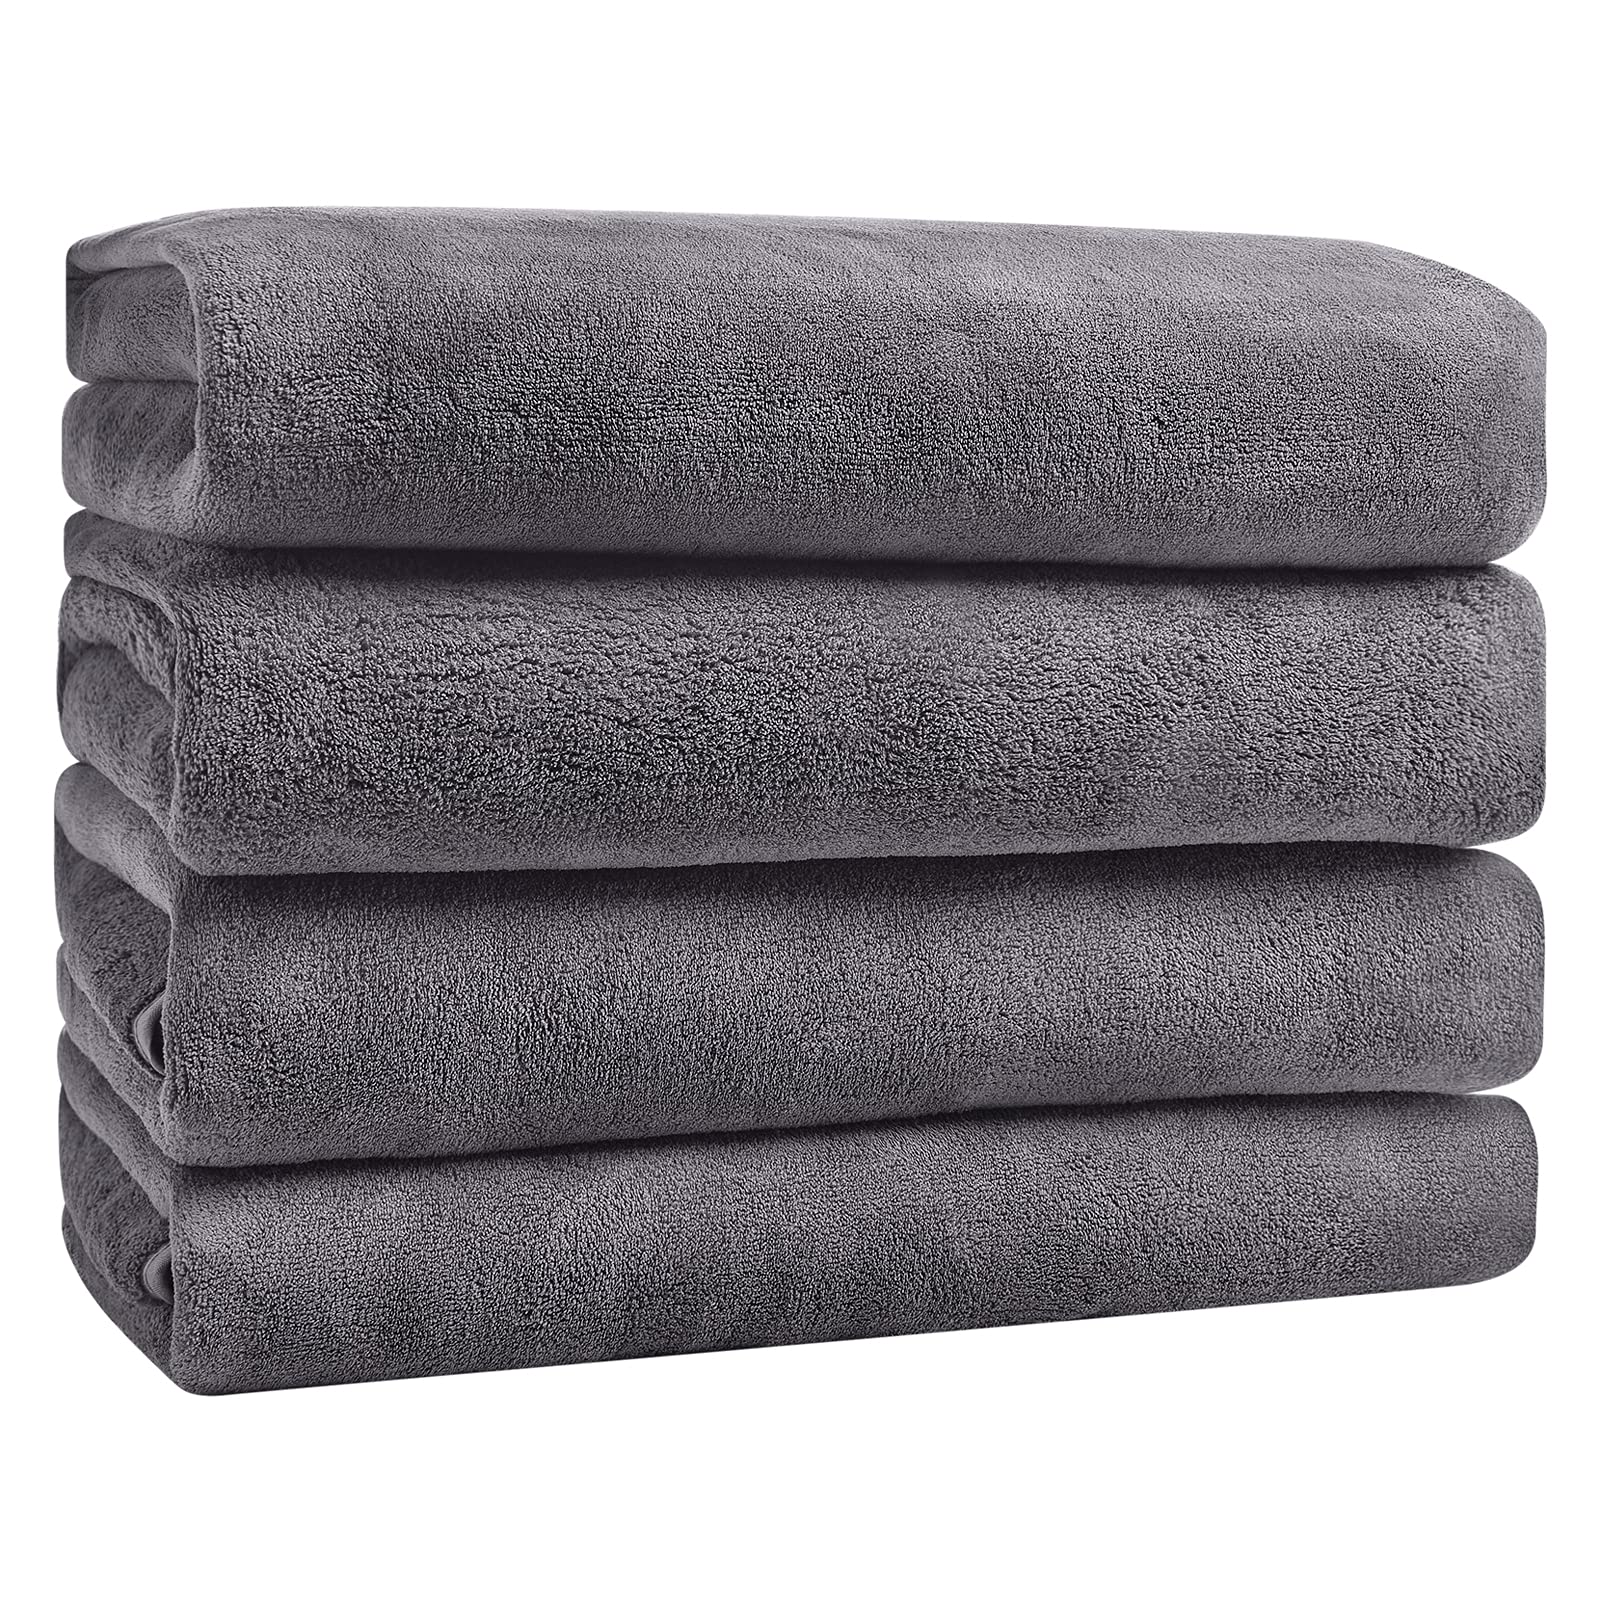 GraceAier Ultra Soft Bath Towels 4 Pack (28 x 56) - Quick Drying - -  Microfiber Coral Velvet Highly Absorbent Towel for Bath Fitness, Bathroom,  Sports, Yoga, Travel Microfiber-grey 28 x 56